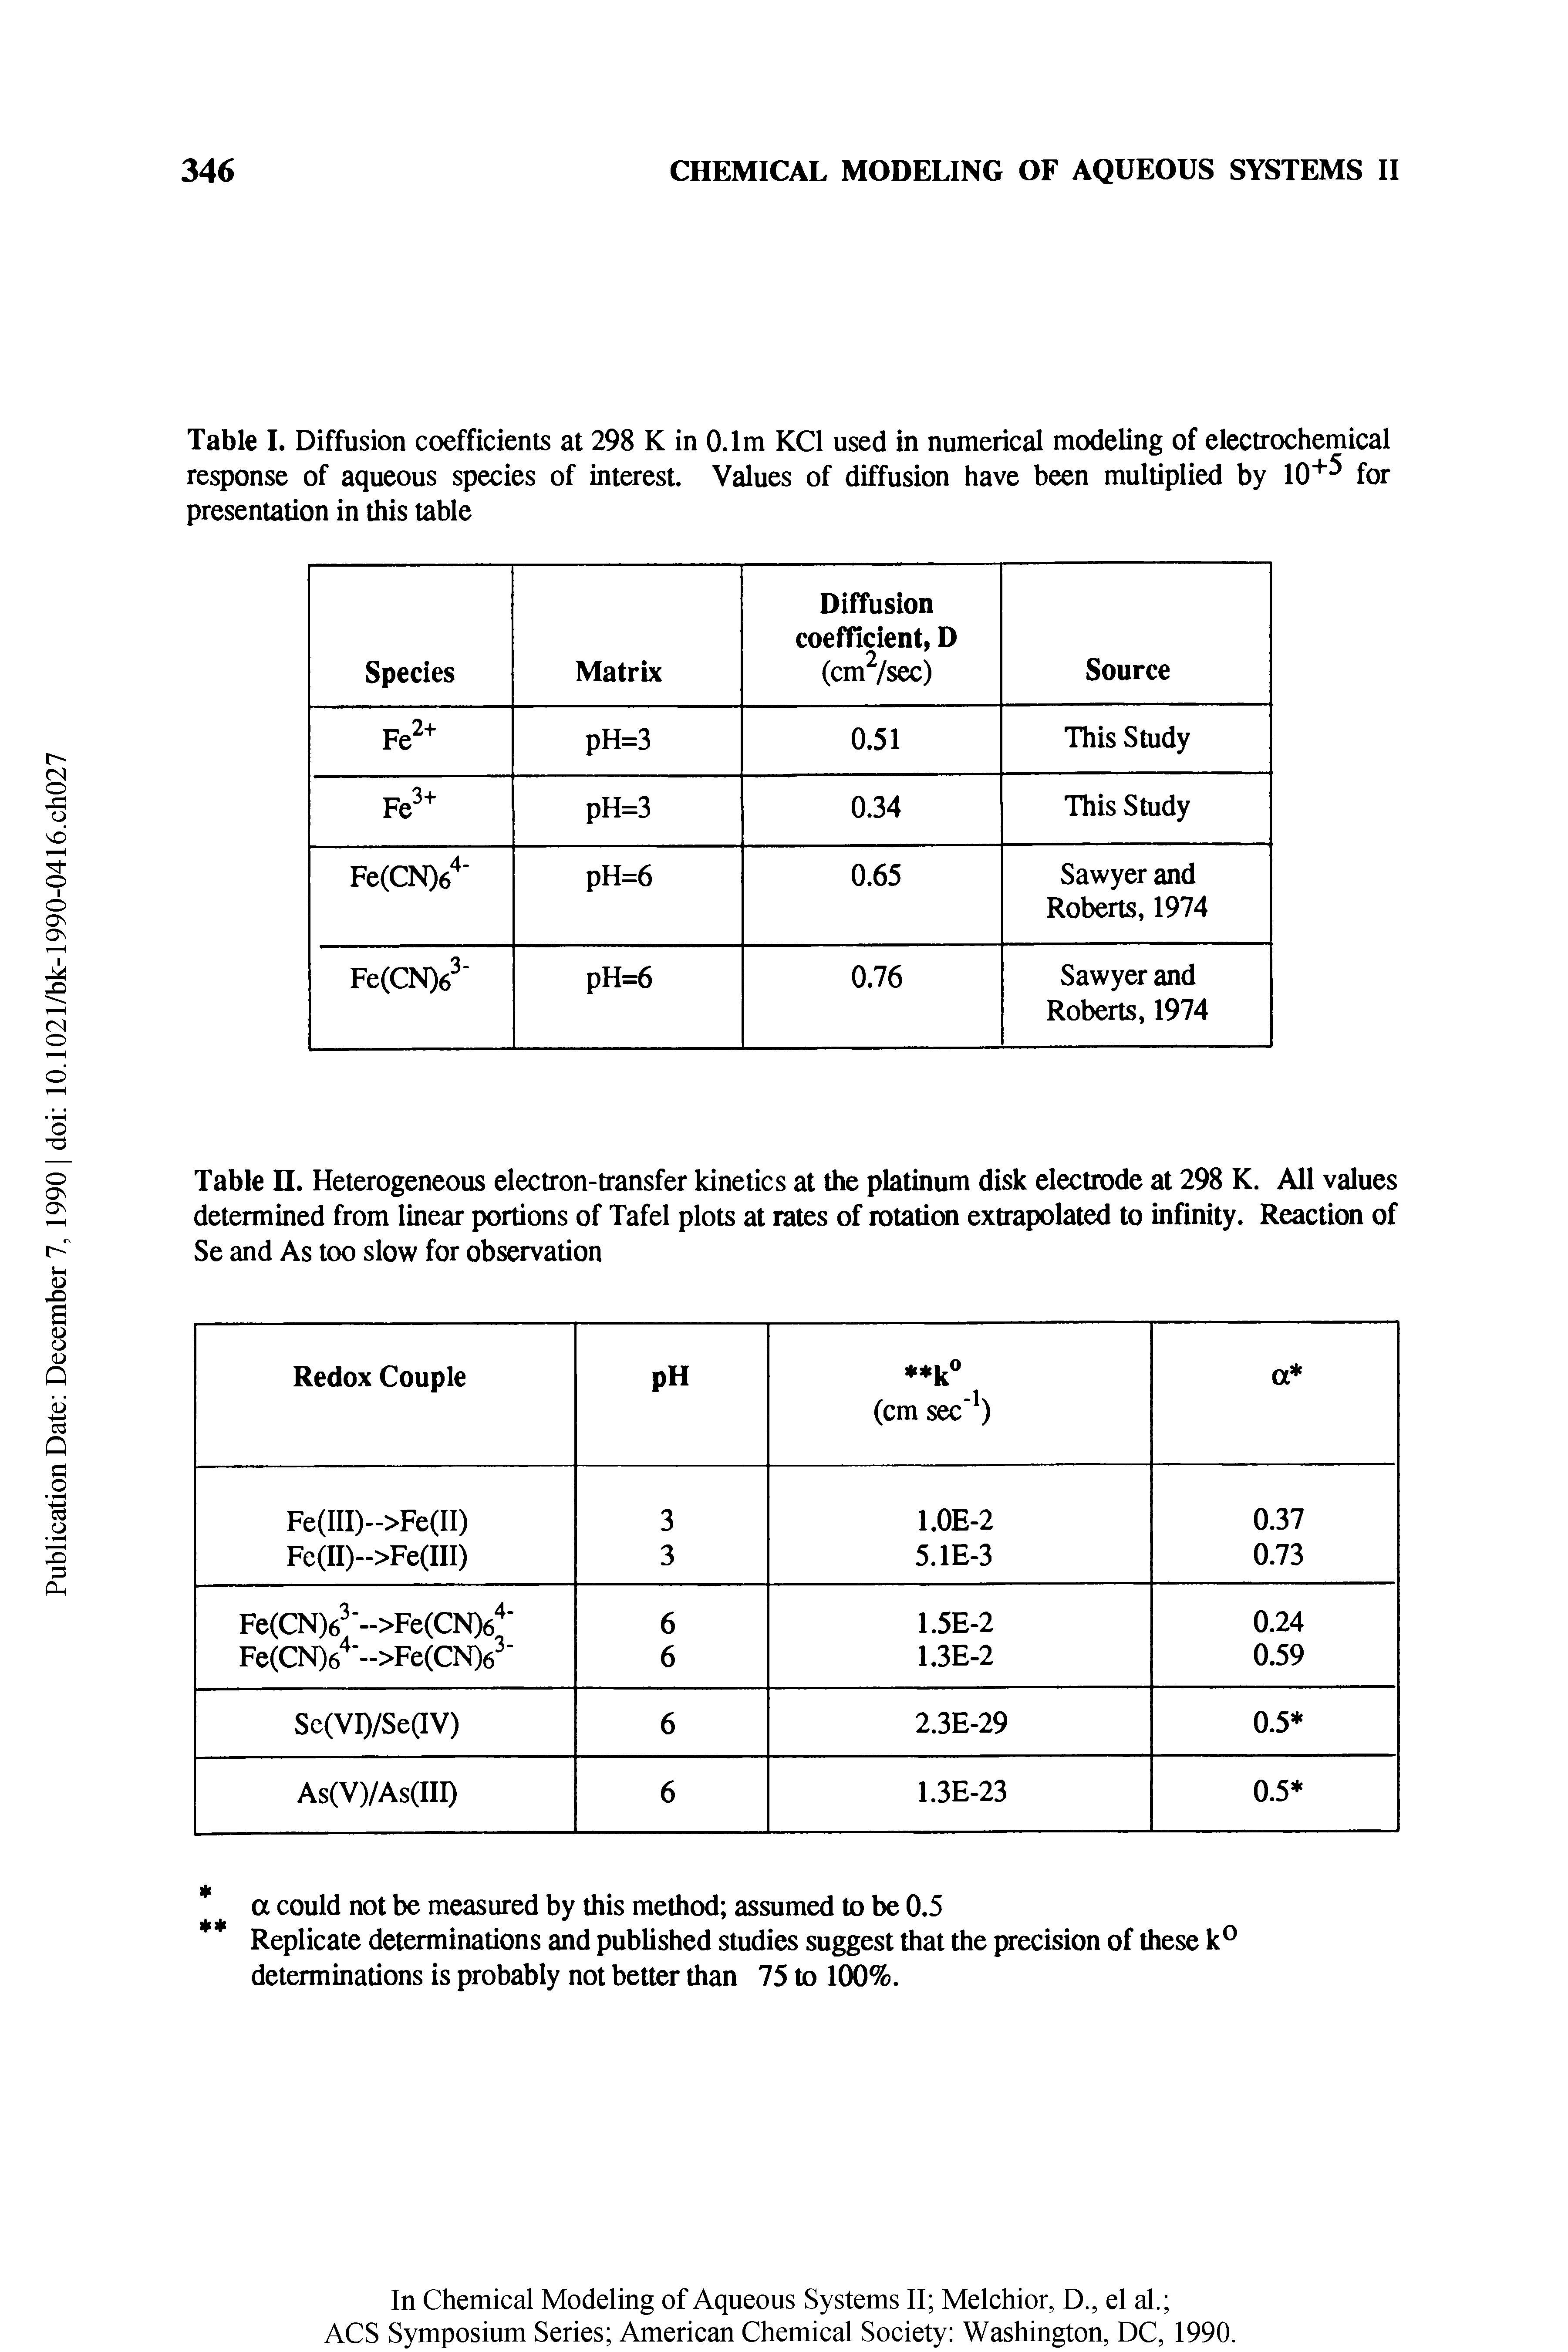 Table H. Heterogeneous electron-transfer kinetics at the platinum disk electrode at 298 K. All values determined from linear portions of Tafel plots at rates of rotation extrapolated to infinity. Reaction of Se and As too slow for observation...